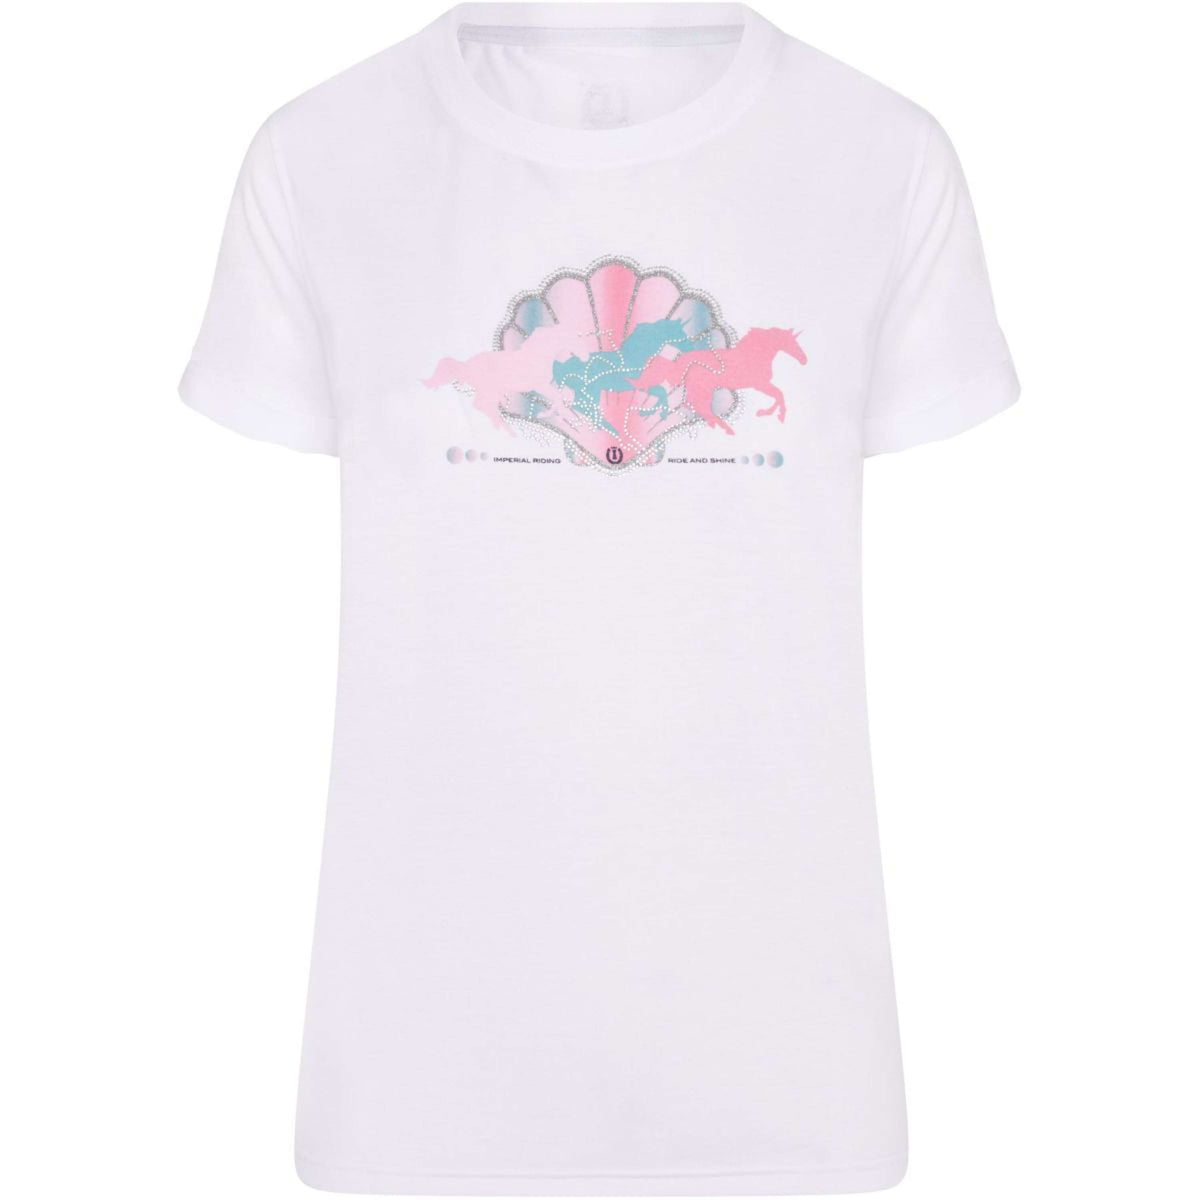 Imperial Riding T-Shirt IRHHorses and Mermaids Weiß